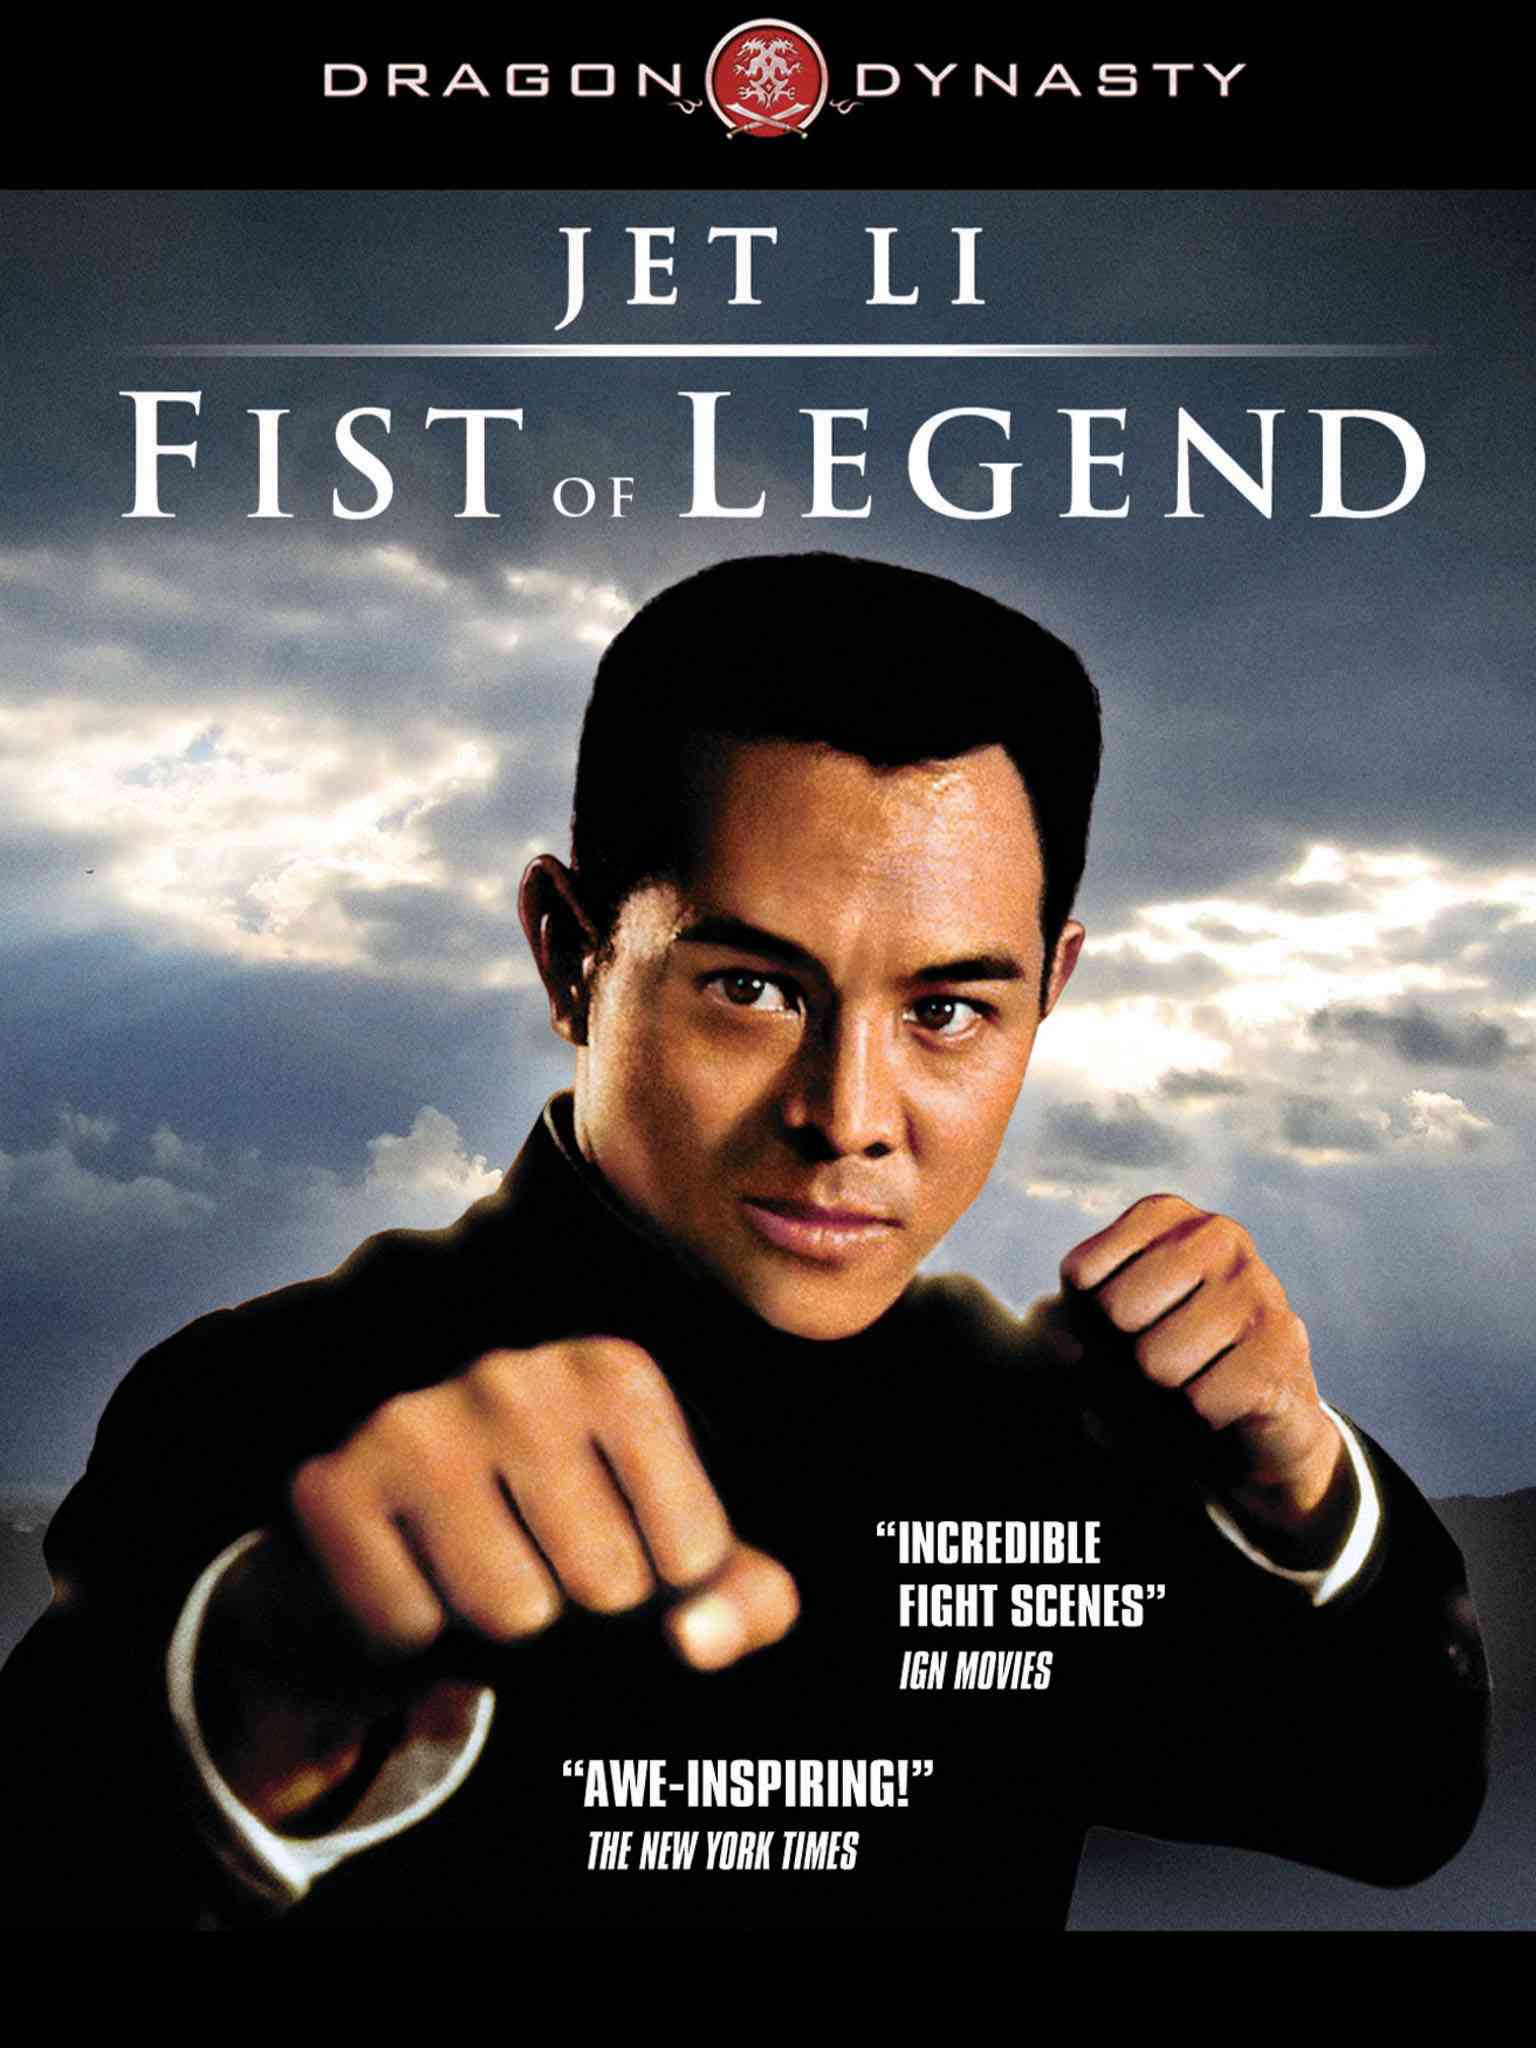 FULL MOVIE: Fist Of Legend (1994) [Action]